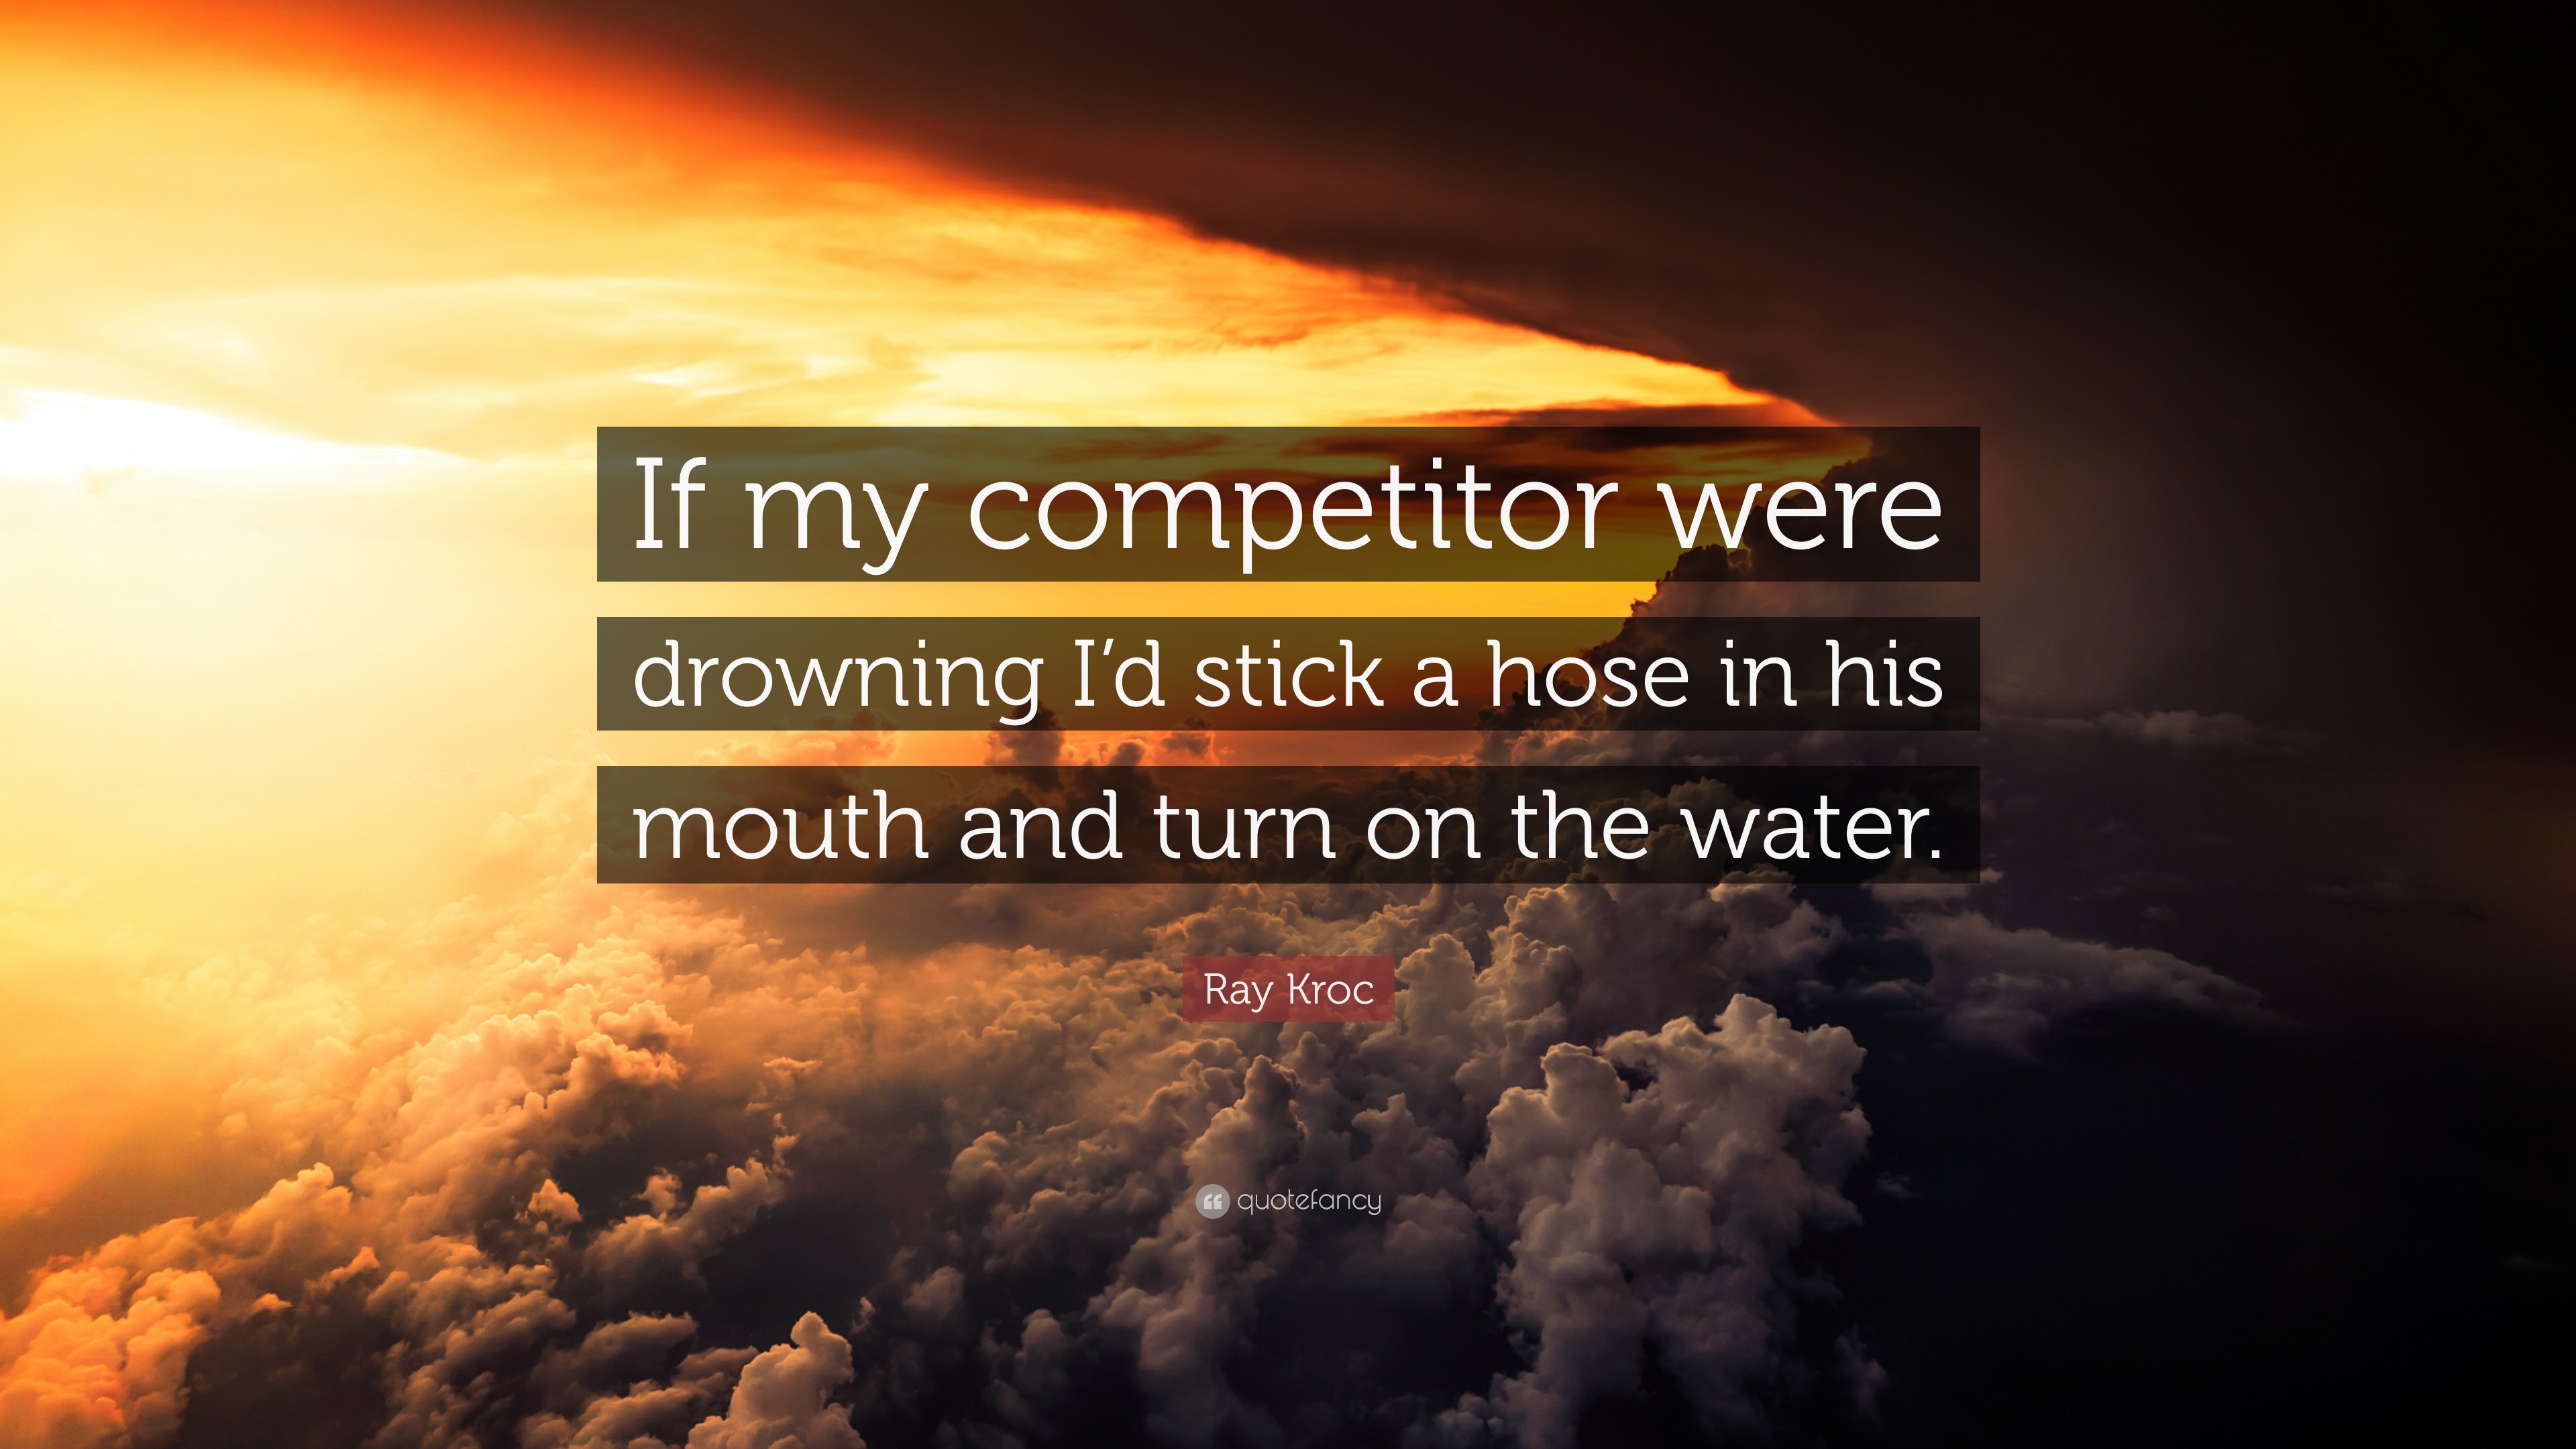 Ray Kroc Quote If My Competitor Were Drowning I D Stick A Hose In His Mouth